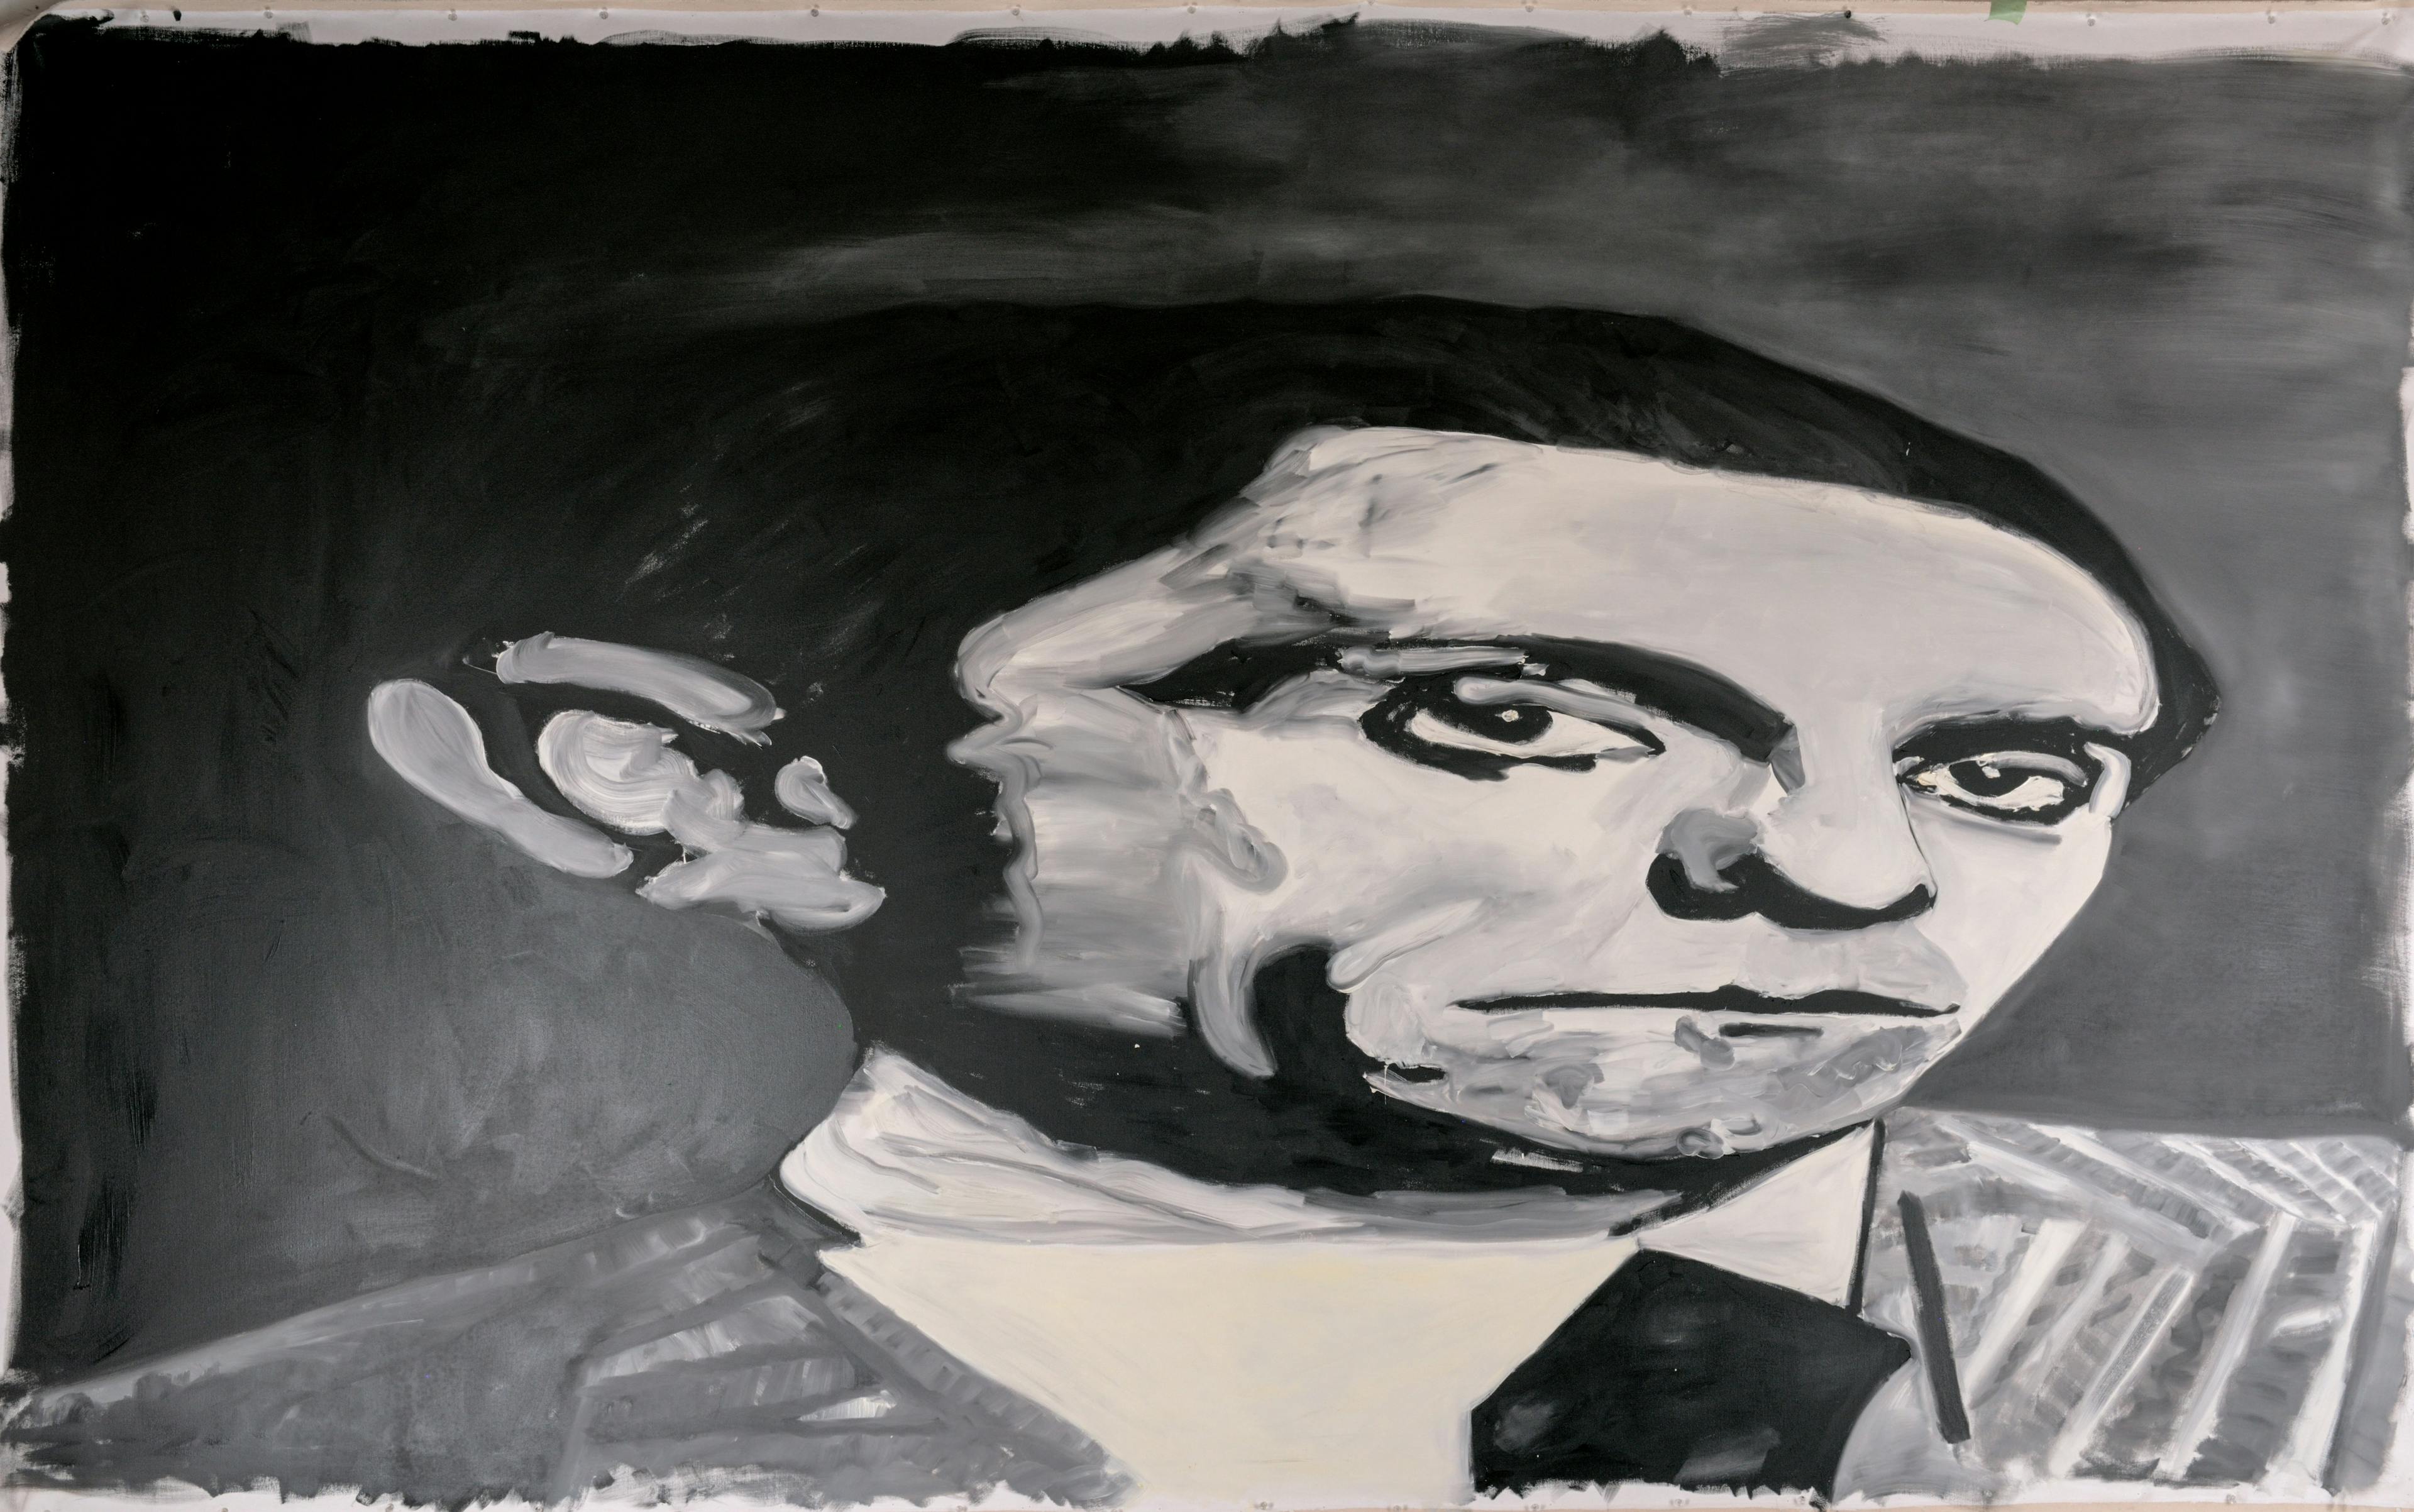 A black and white painted portrait of the Third Reich’s Minister of Propaganda. The image appears to be stretched out horizontally. It has bold brush strokes and unfinished edges.